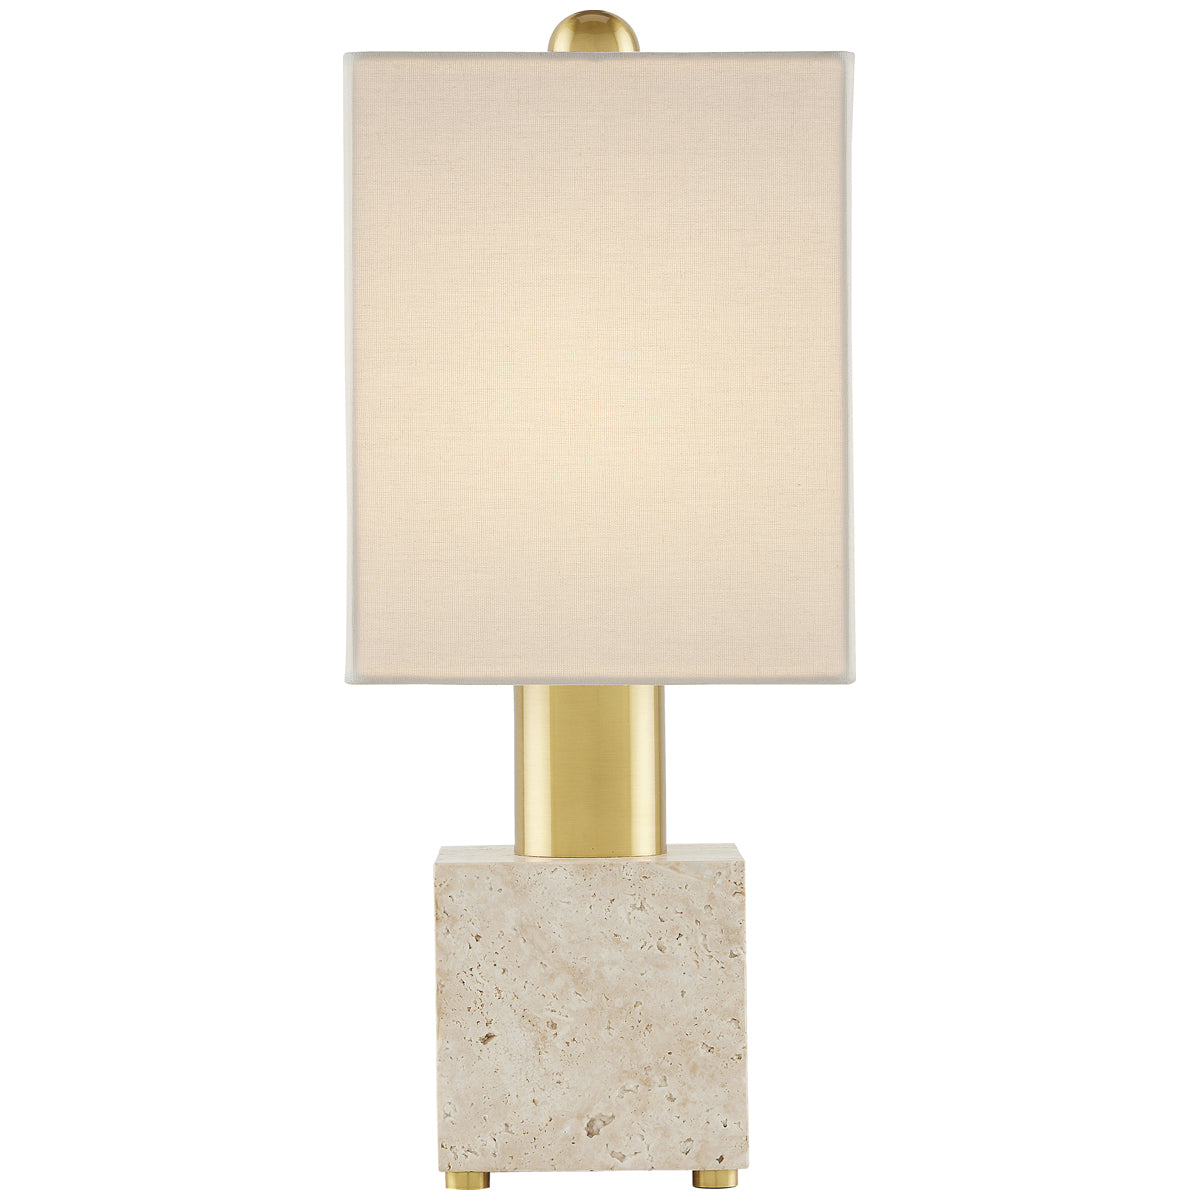 Currey and Company Gentini Table Lamp